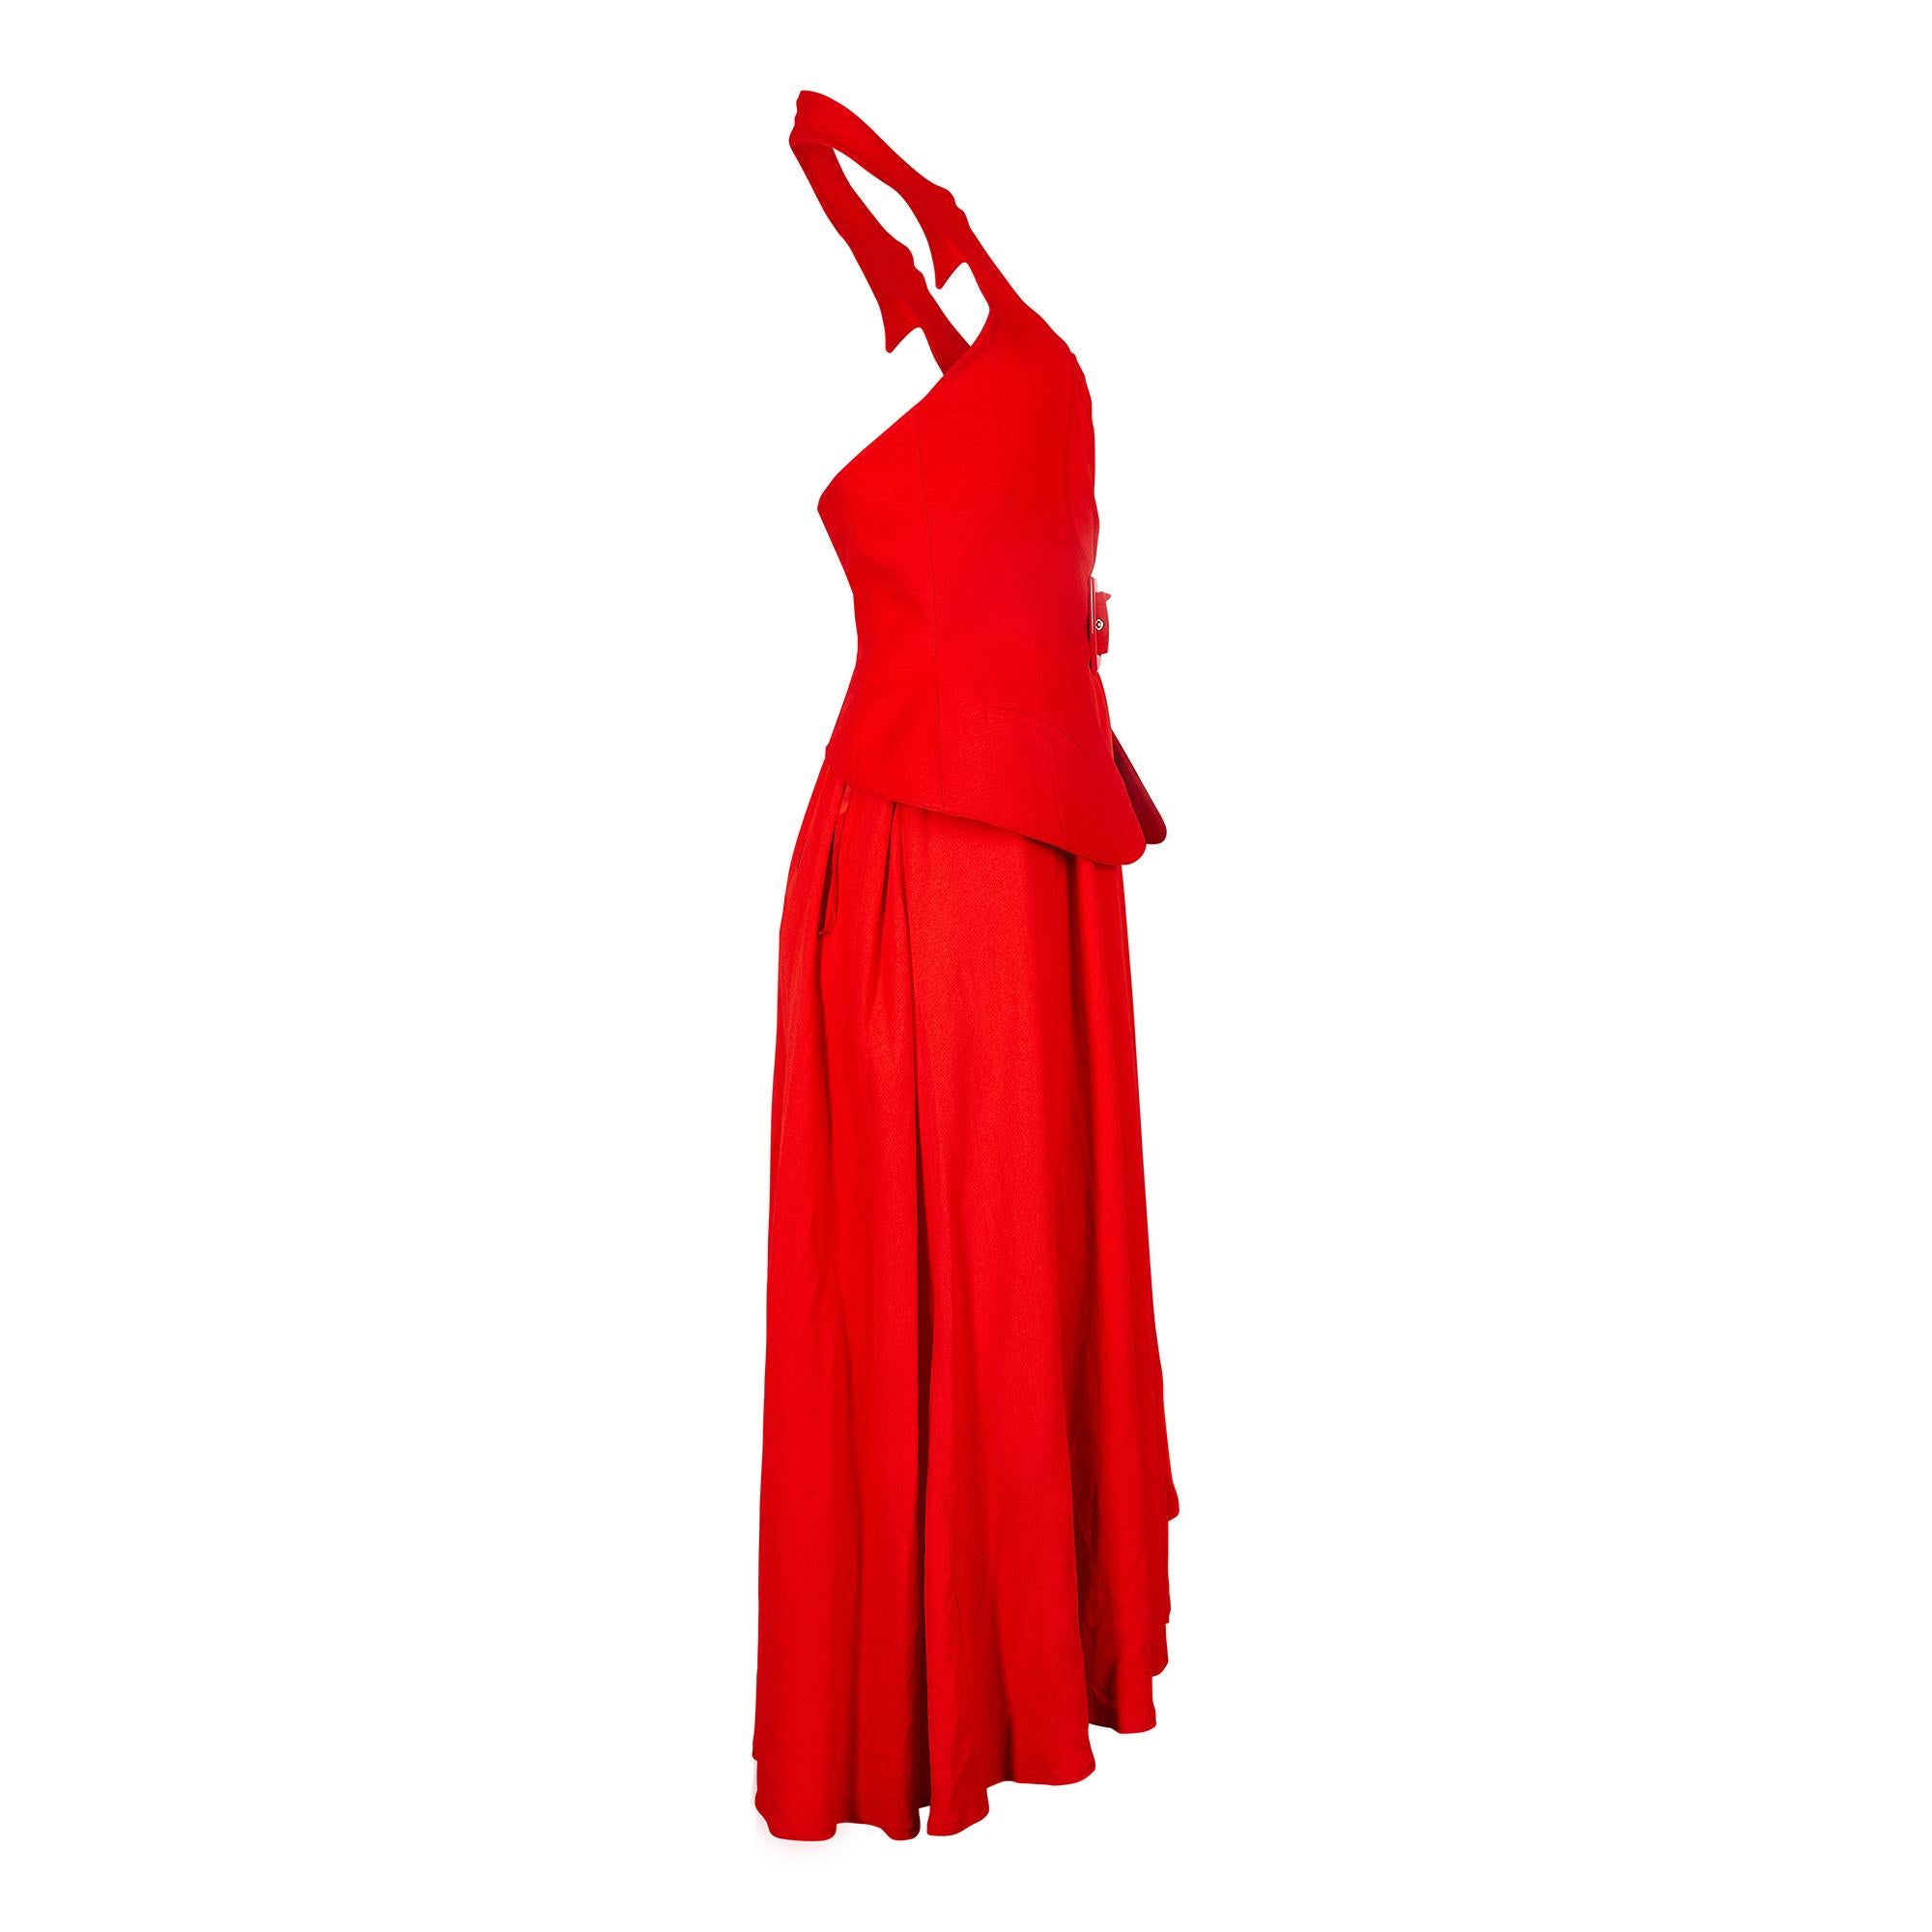 1992 Thierry Mugler Couture Halter Neck Red Dress In Excellent Condition For Sale In London, GB